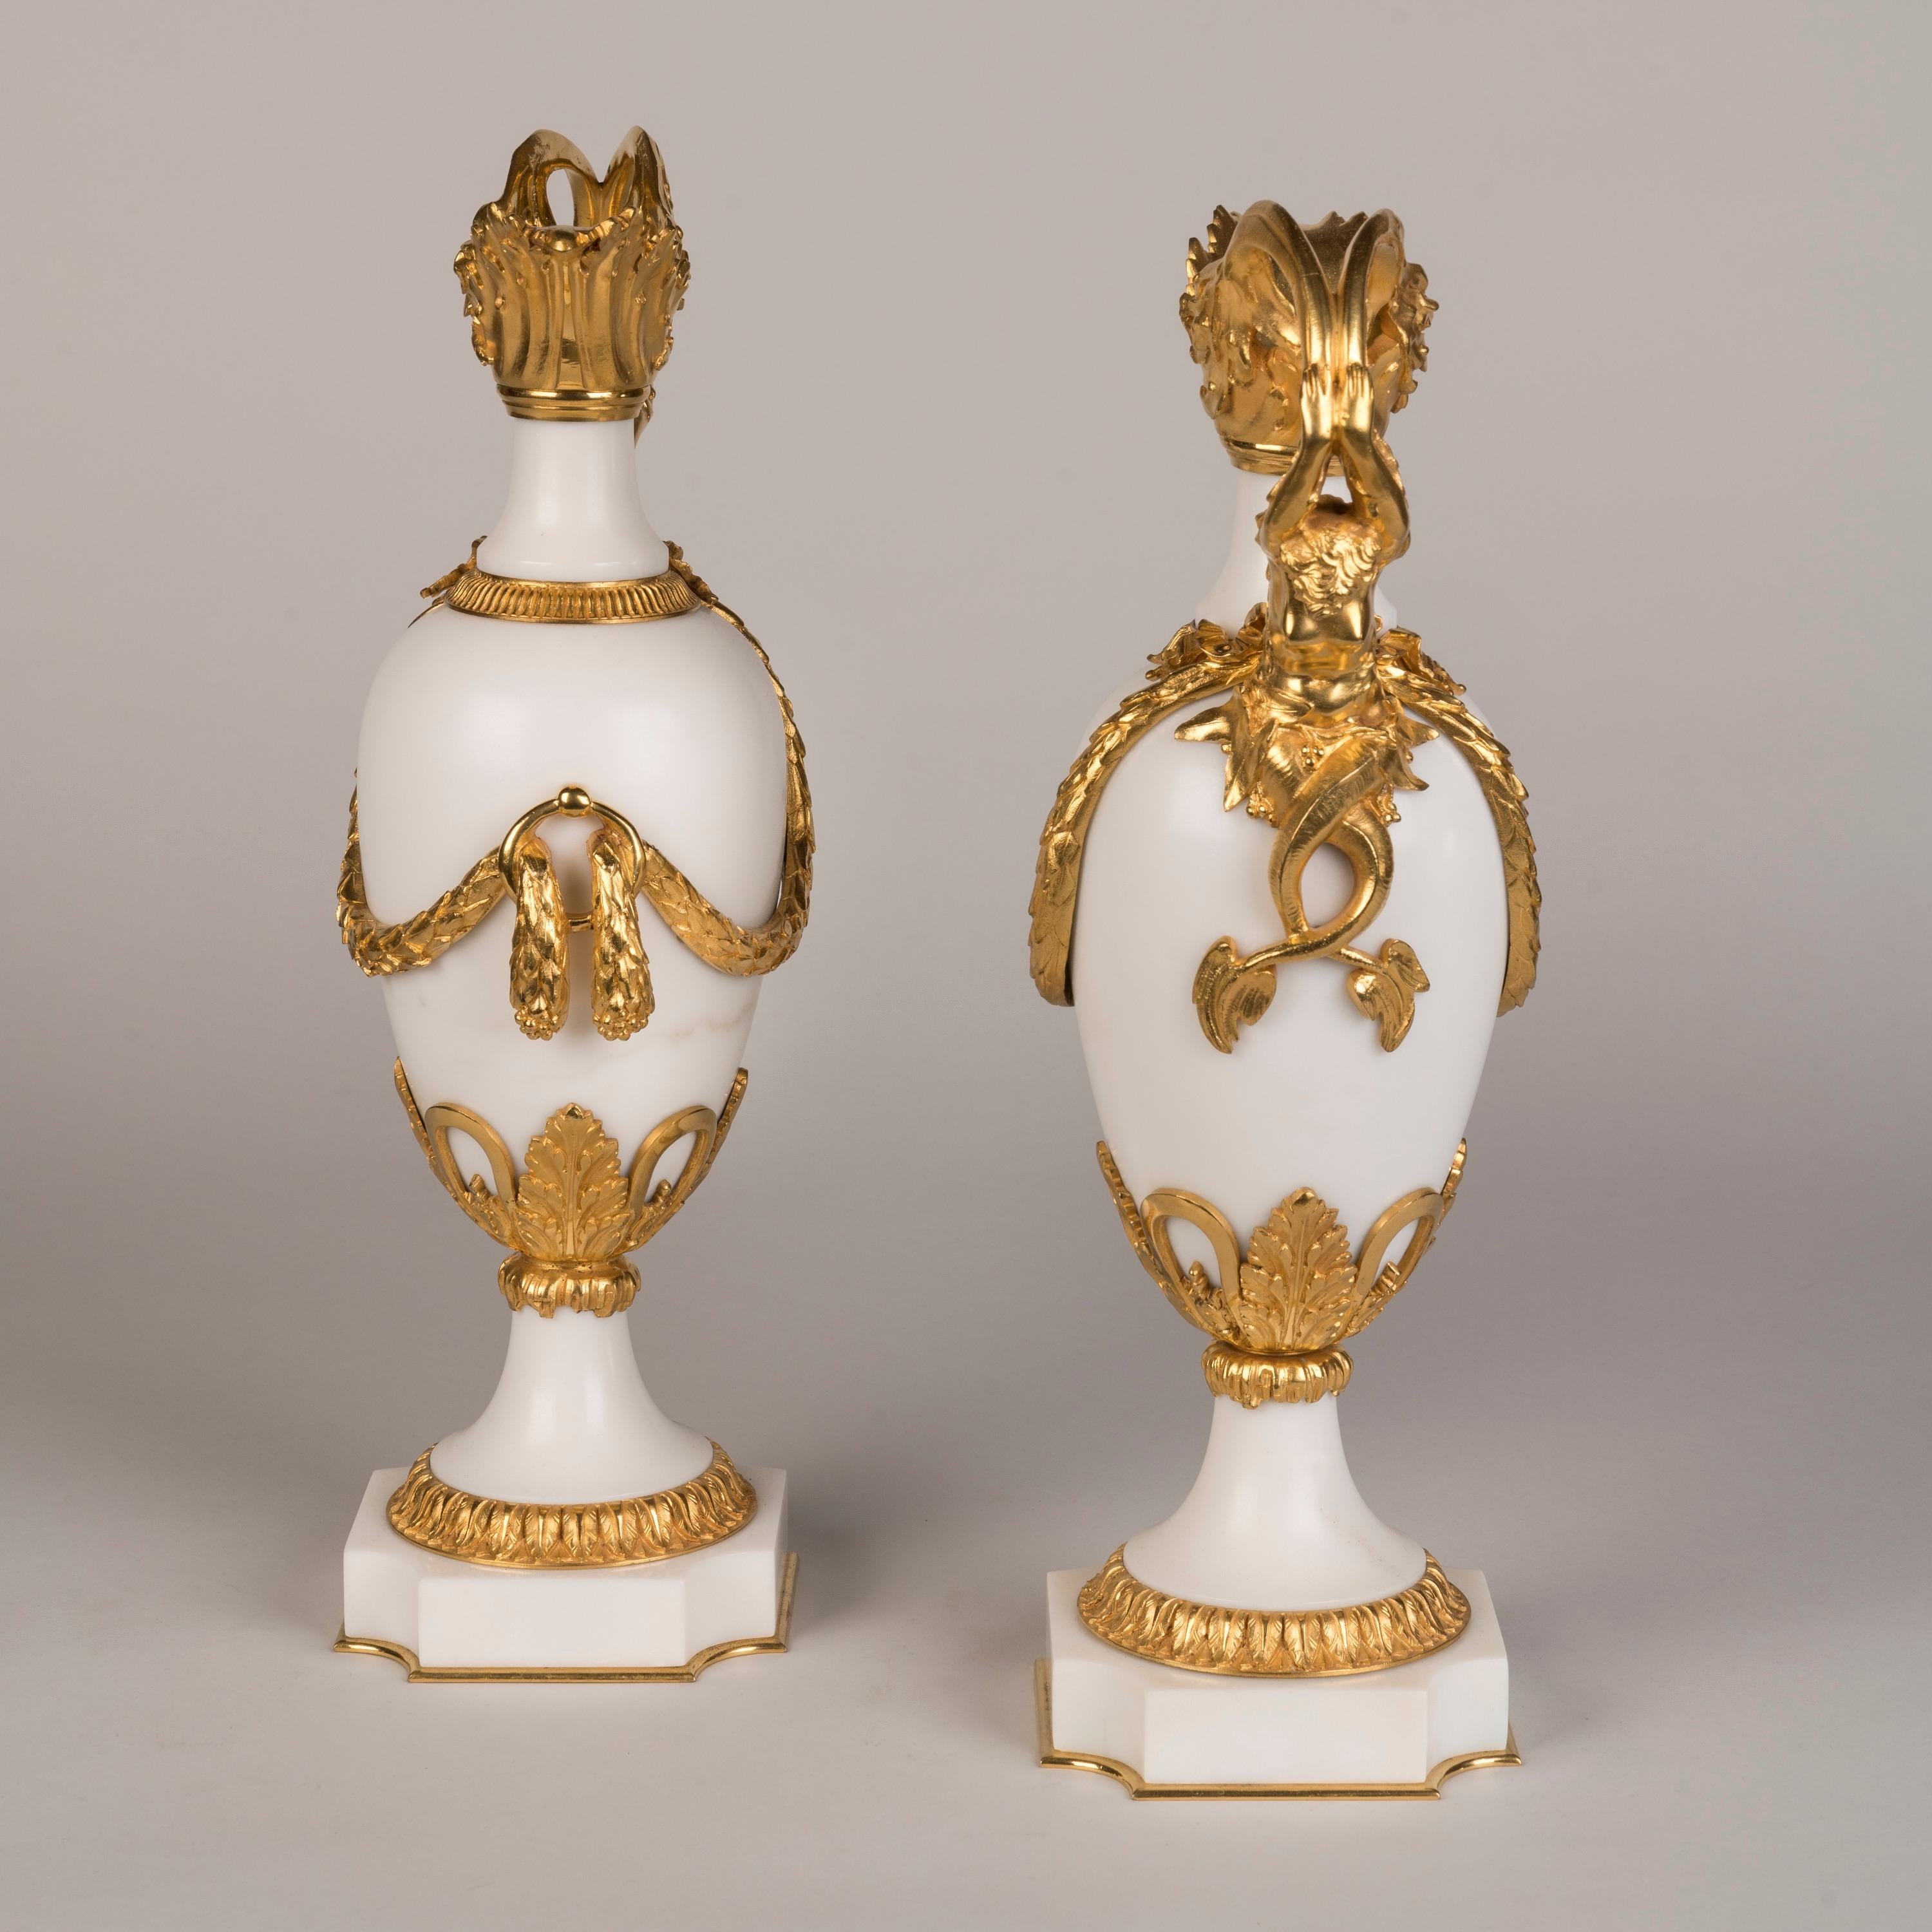 Louis XVI 19th Century French Pair of Ormolu-Mounted Carrara Marble Vases For Sale